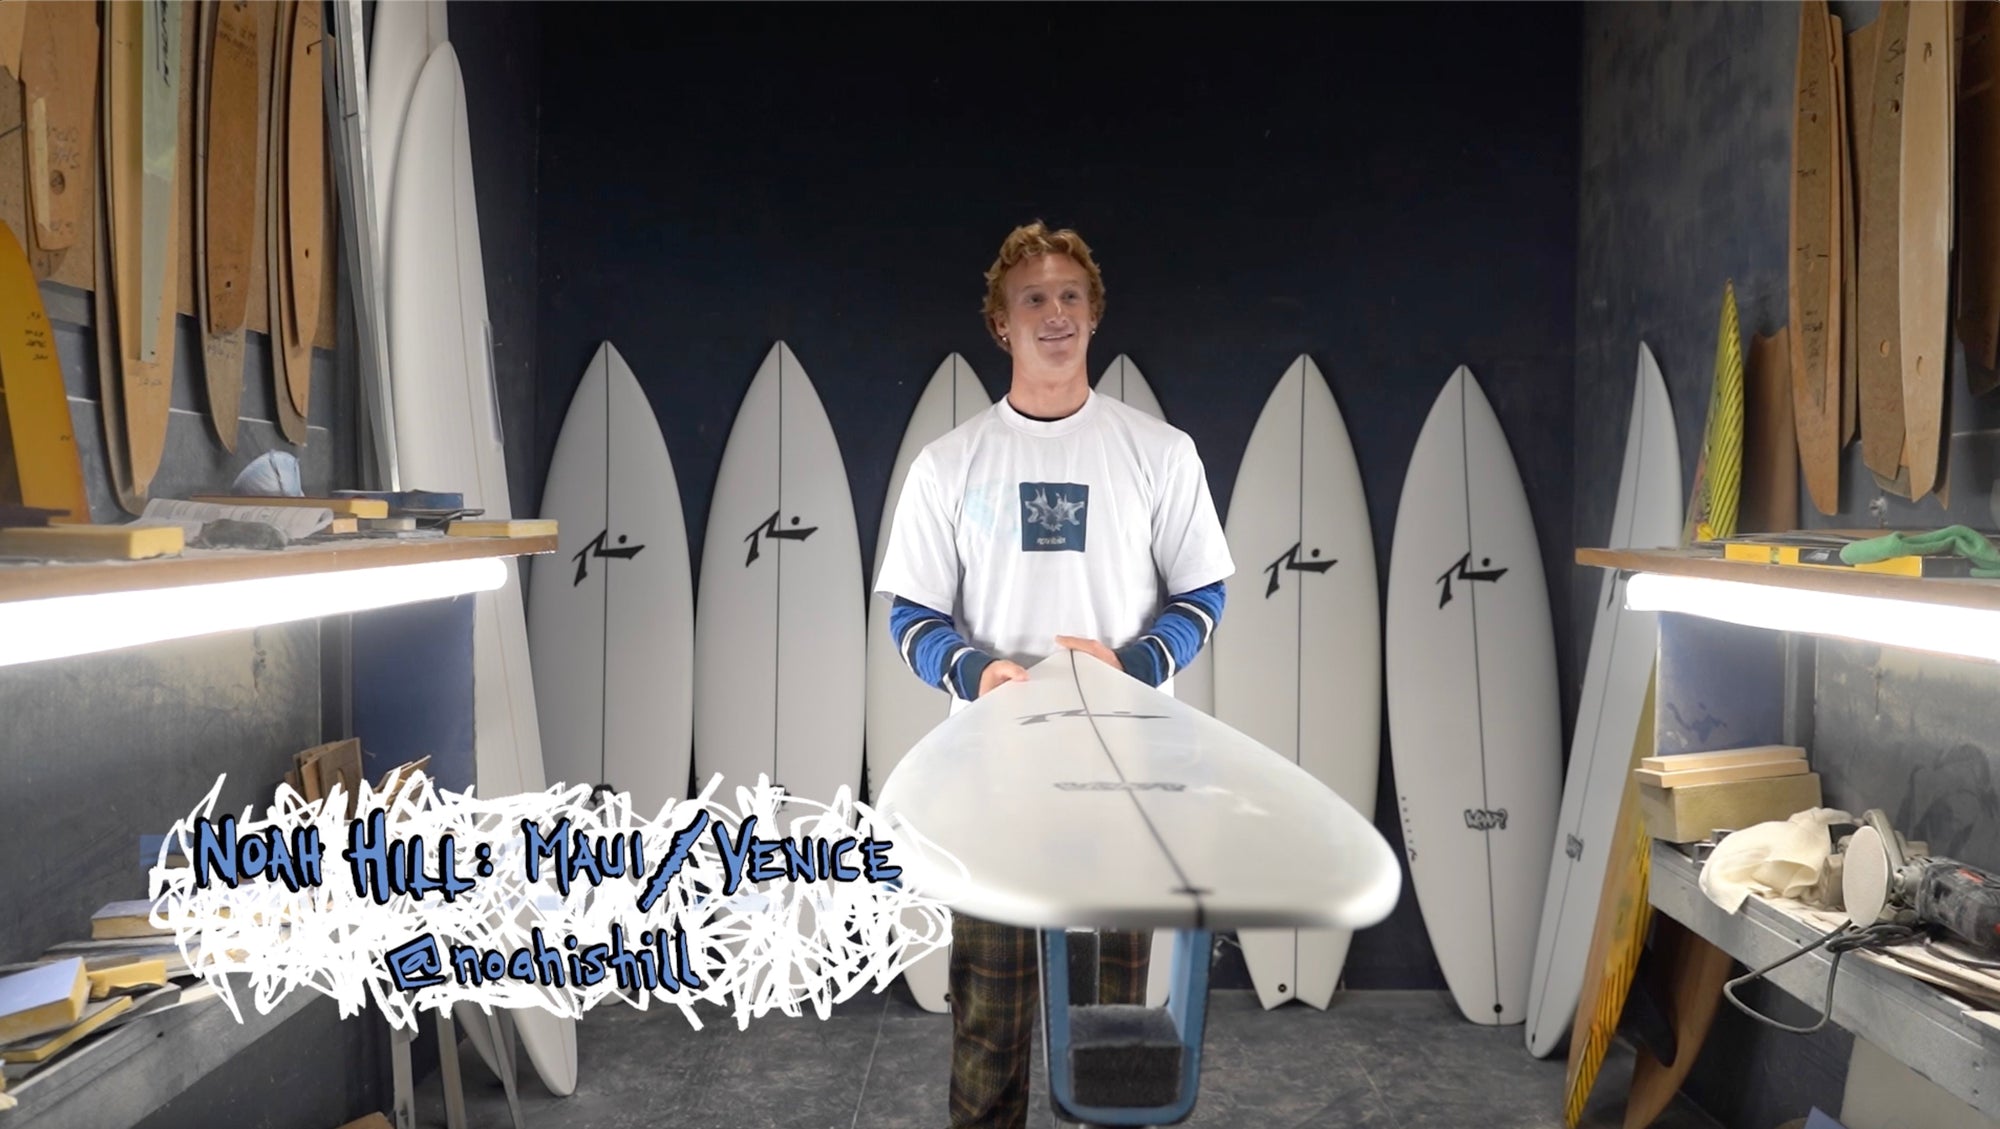 Noah Hill quiver review video - Rusty Surfboards